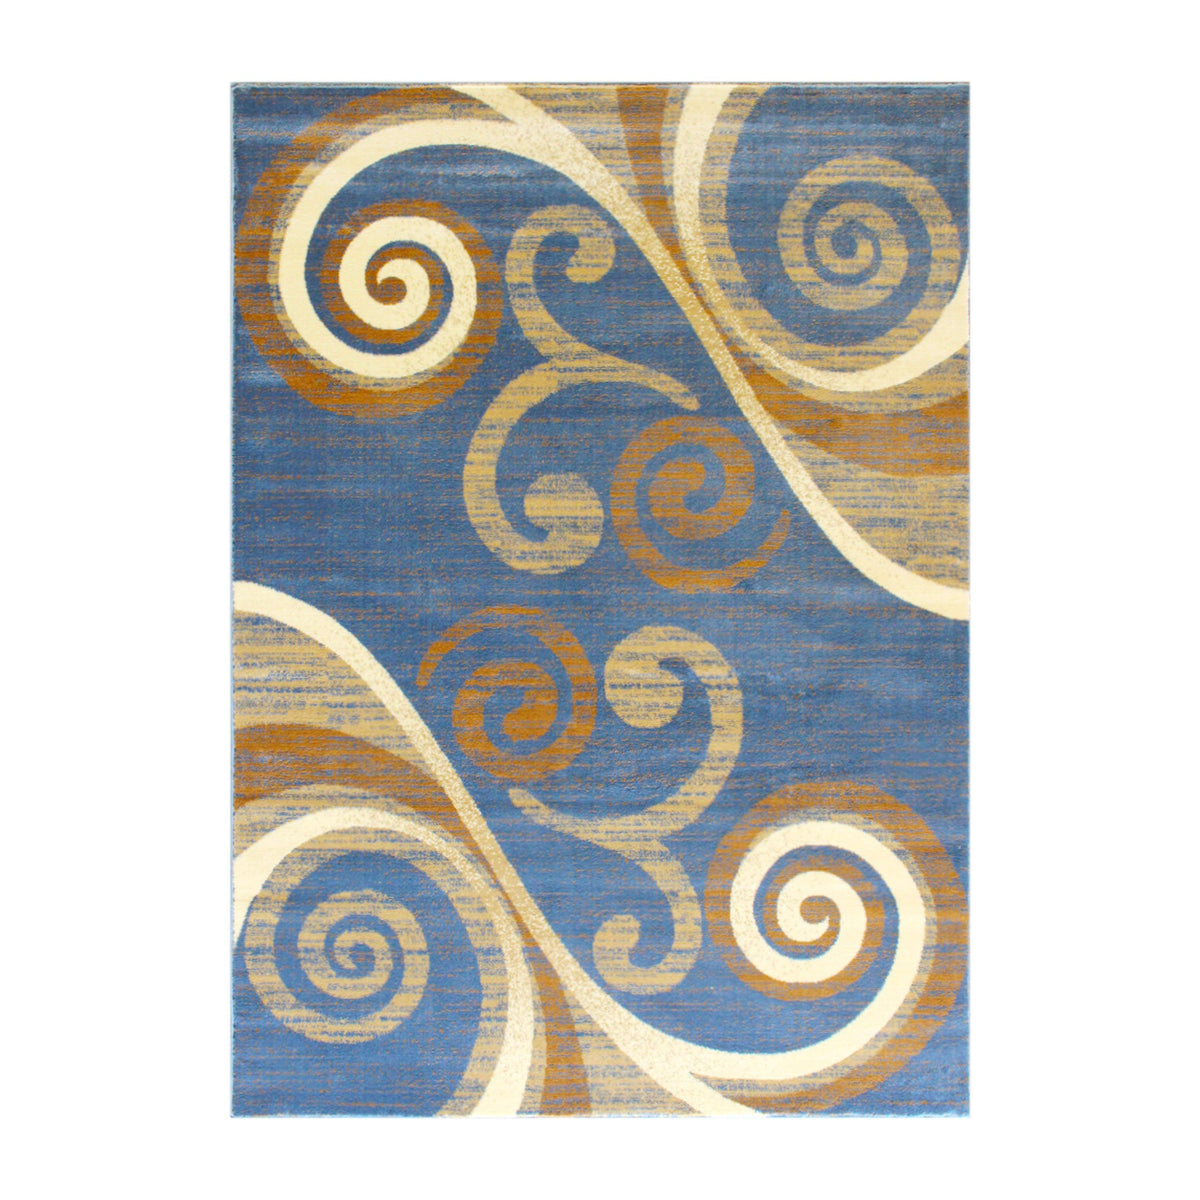 Blue,5' x 7' |#| Modern Distressed Swirl Abstract Style Indoor Area Rug in Blue - 5' x 7'